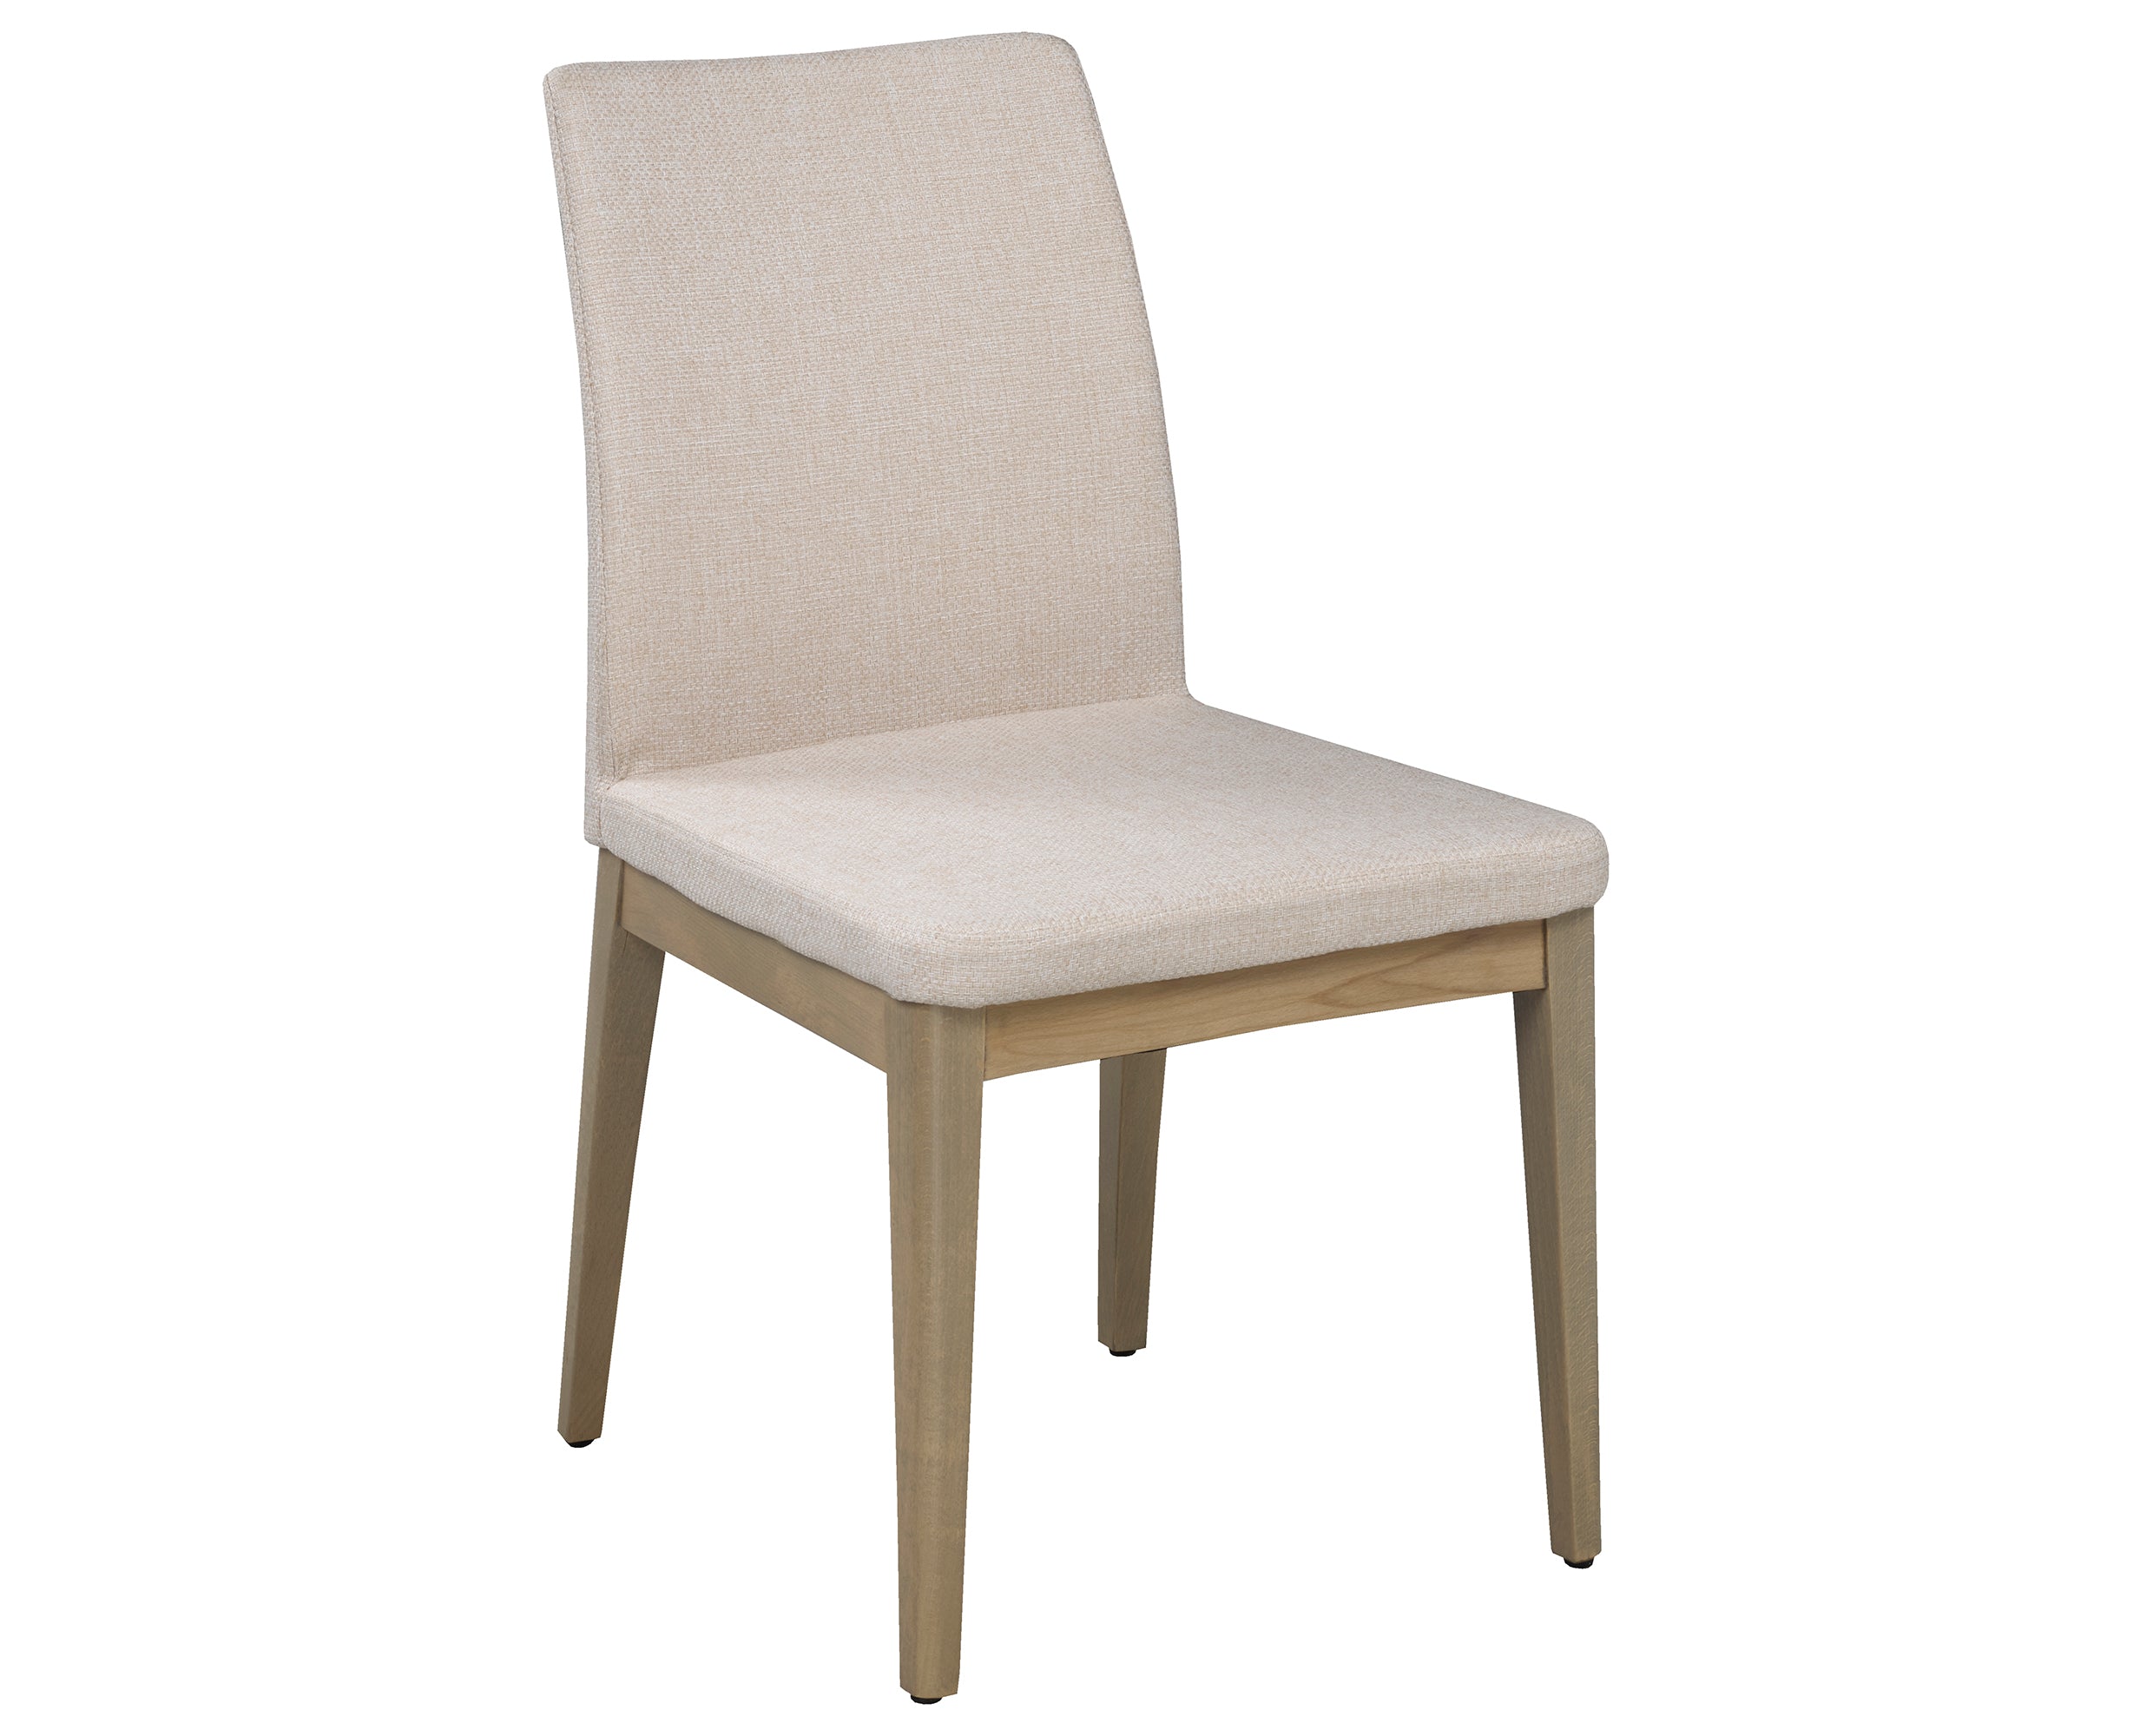 Chair as Shown | Cardinal Woodcraft Fjord Dining Chair | Valley Ridge Furniture